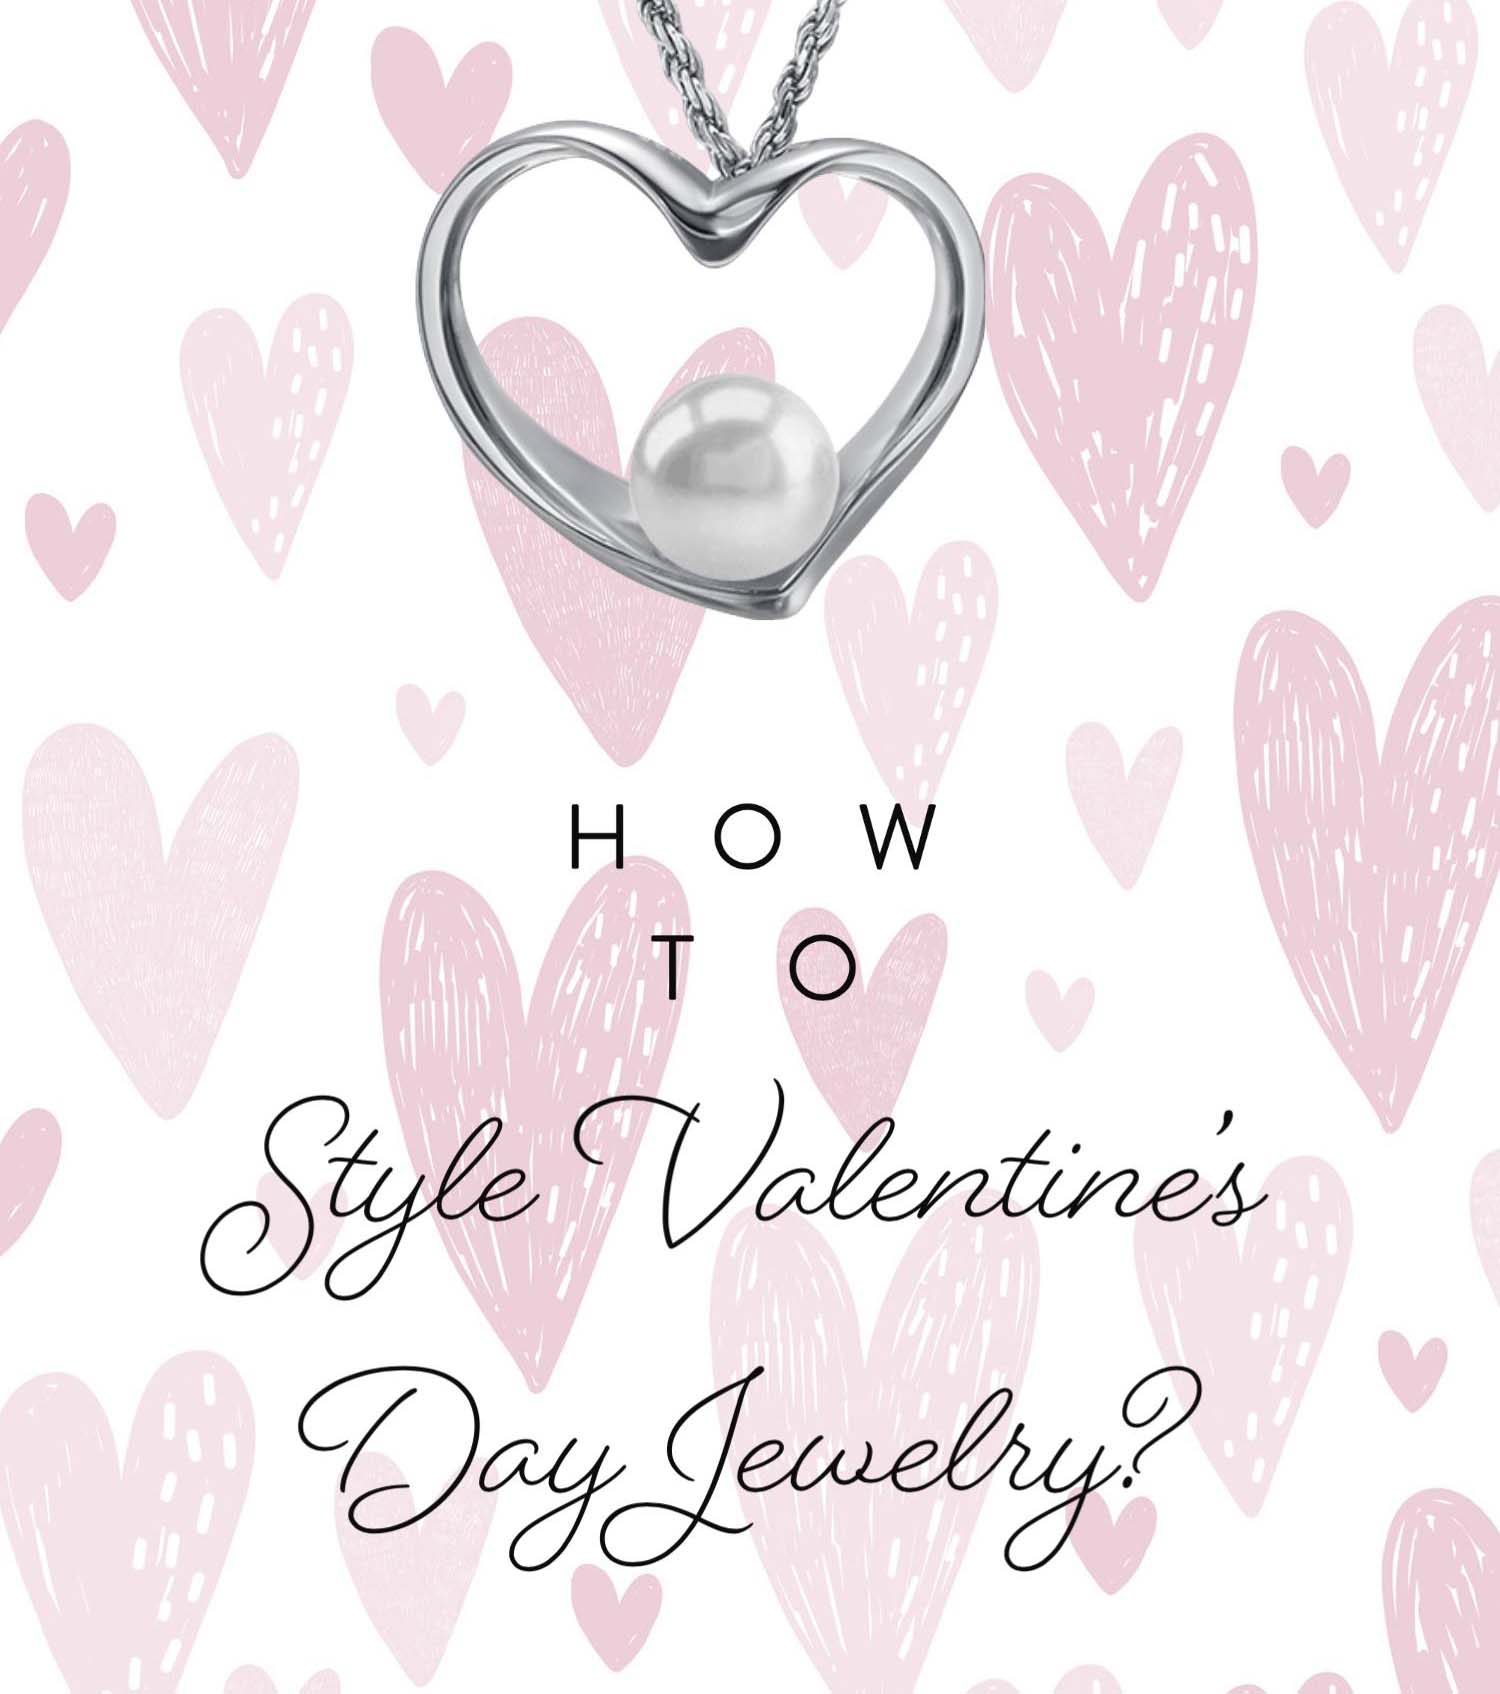 <h1 style="font-family: Georgia, serif; font-size: 30px; color: #53565A;">How to Style <br> Valentine's Jewelry</h1>